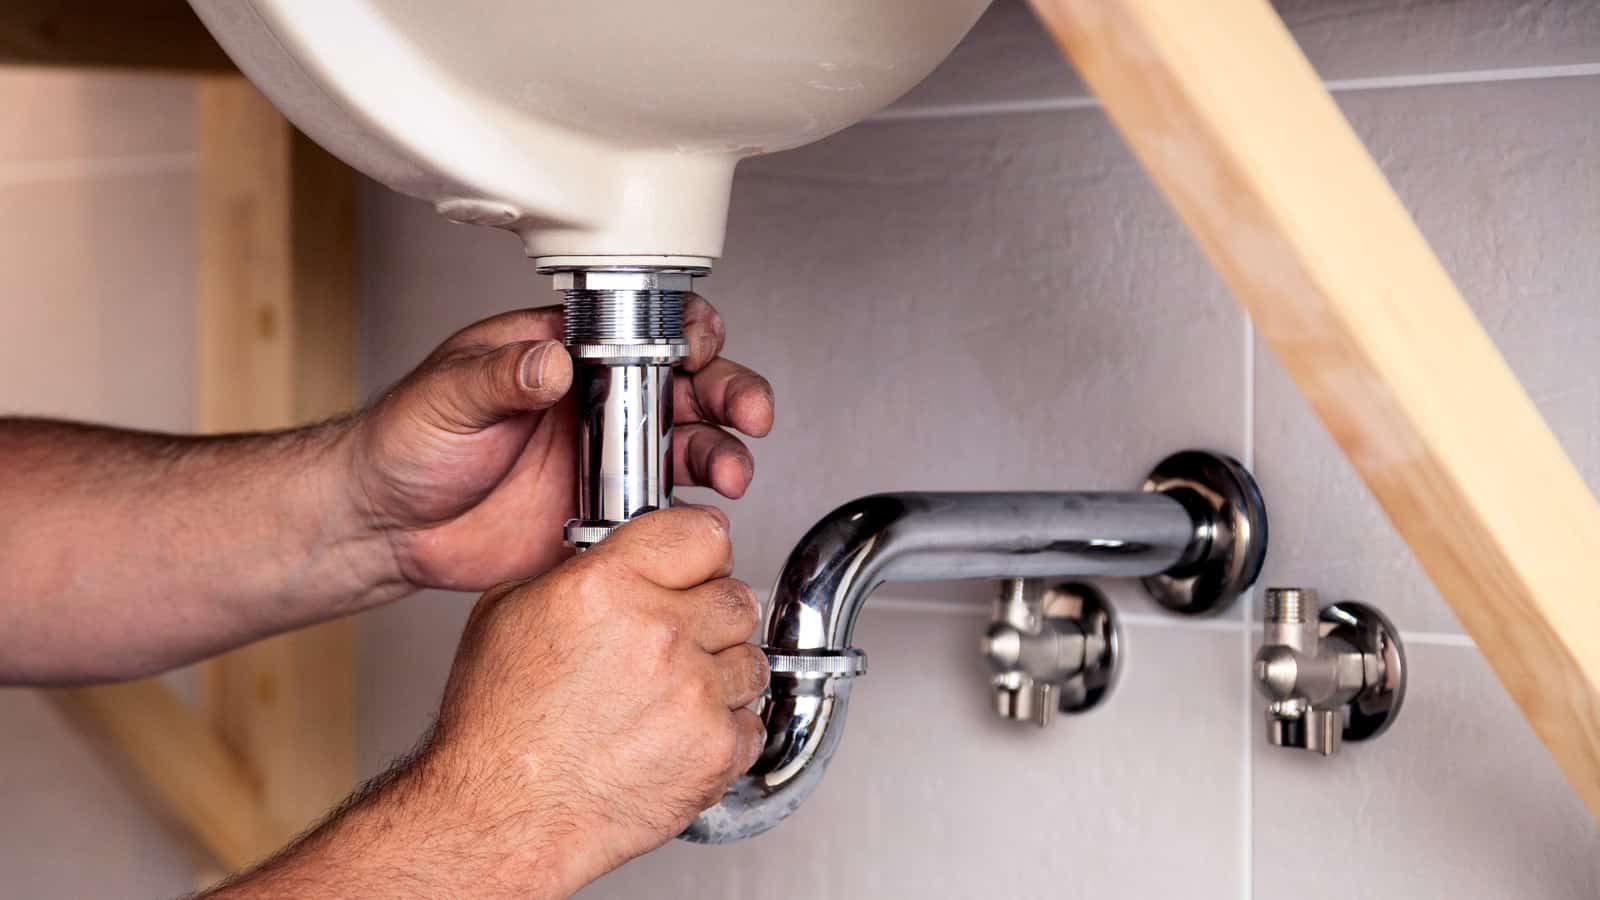 Roto-Rooter Plumbing & Water Cleanup of Cleveland